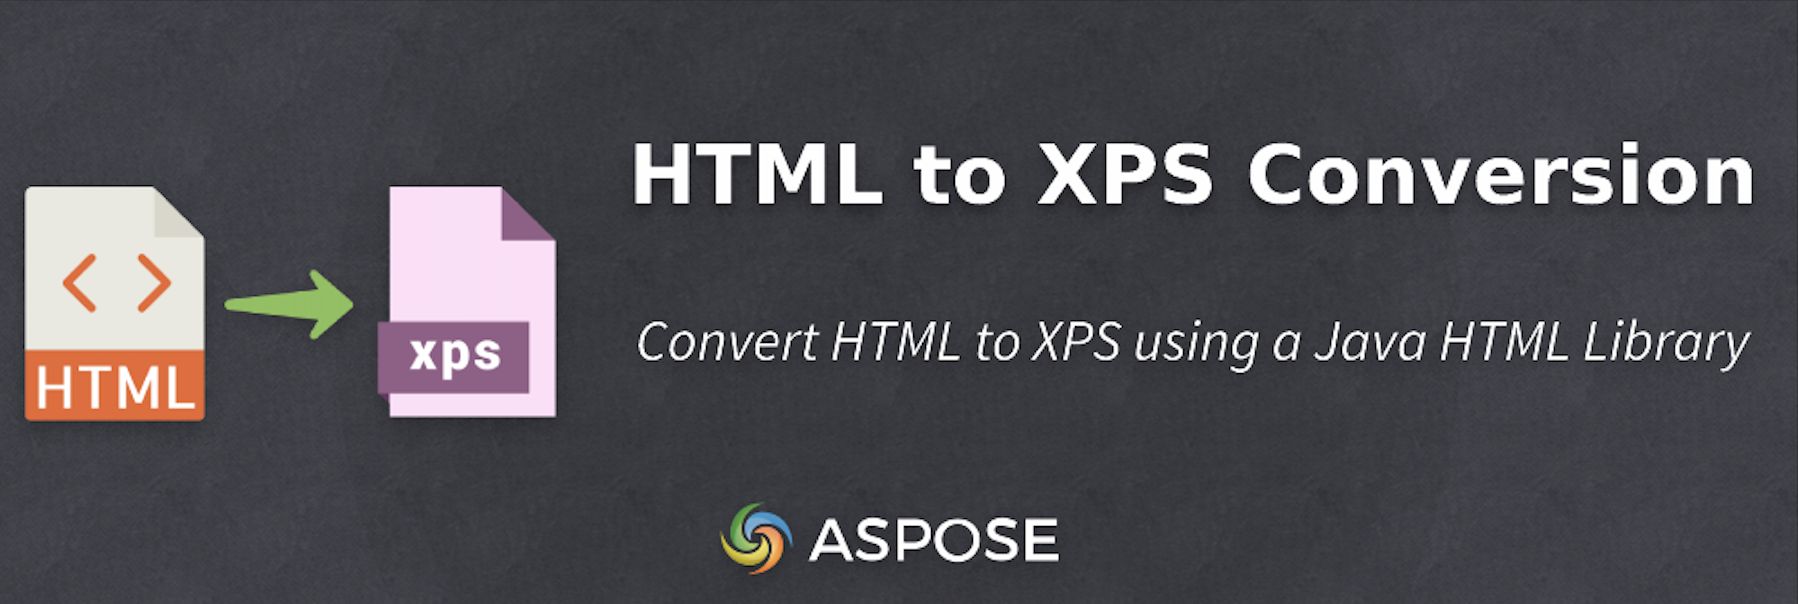 Convert HTML to XPS using a Java HTML Library